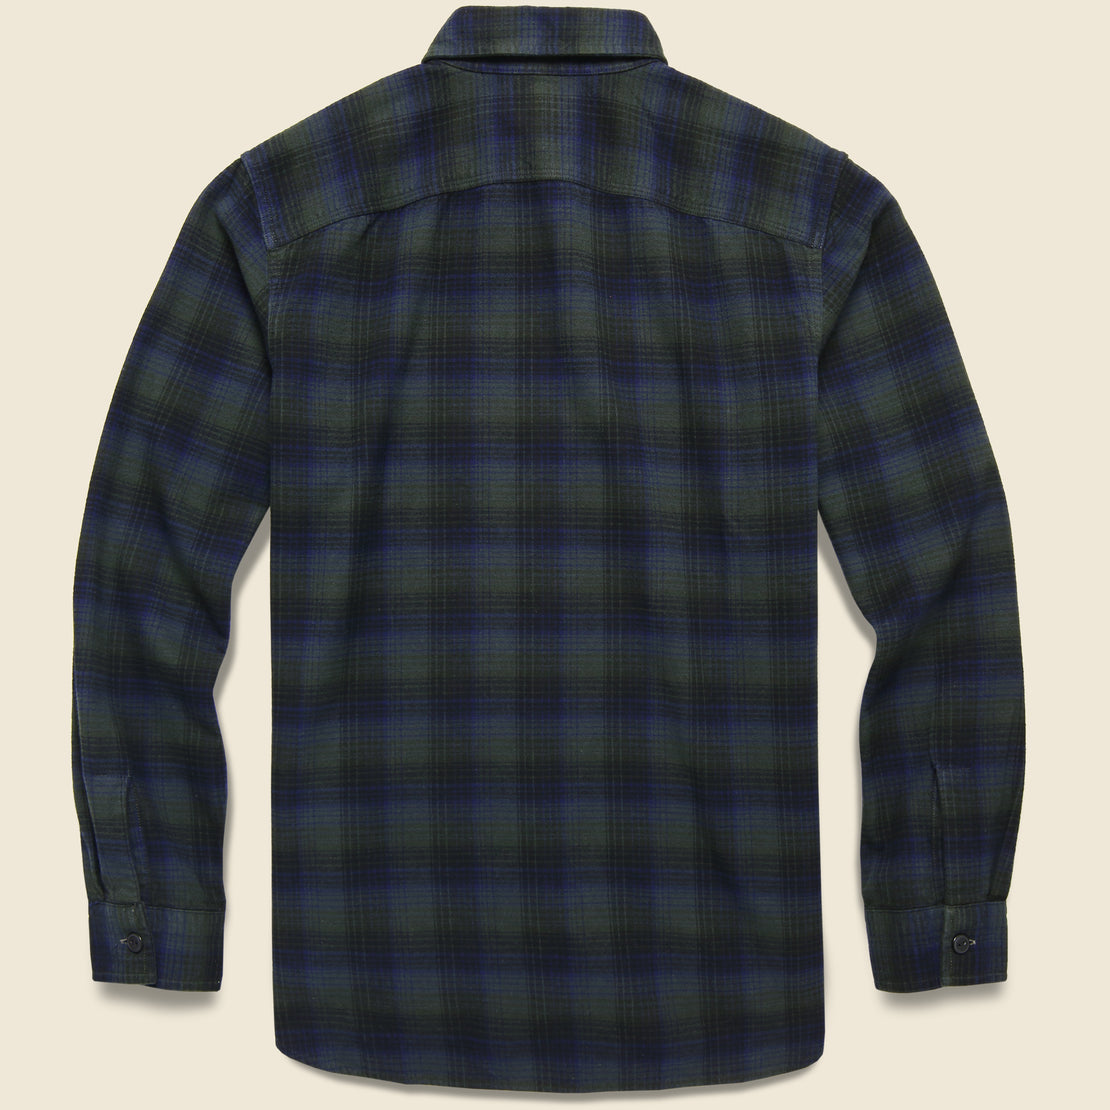 Sweet Orr Workshirt - Green/Blue - RRL - STAG Provisions - Tops - L/S Woven - Plaid